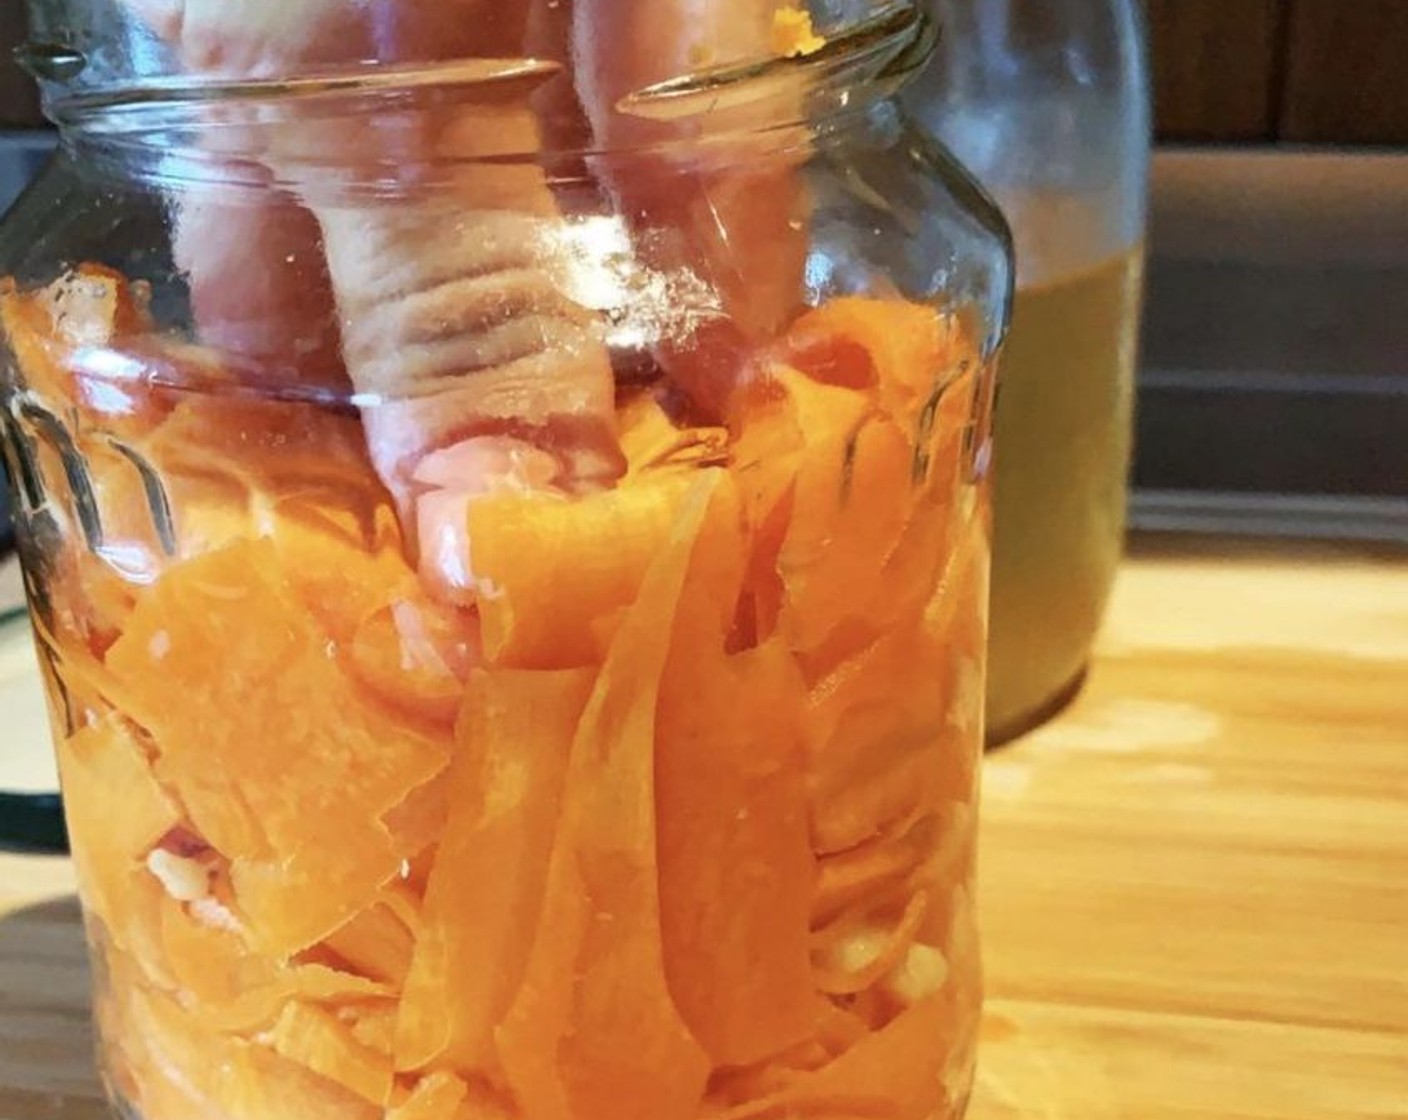 step 3 In a bowl, mix carrots, ginger, and Himalayan Rock Salt (1 tsp), then add the ingredients into your sterilized glass jar, pressing them down with your clean hands or a wooden spoon.